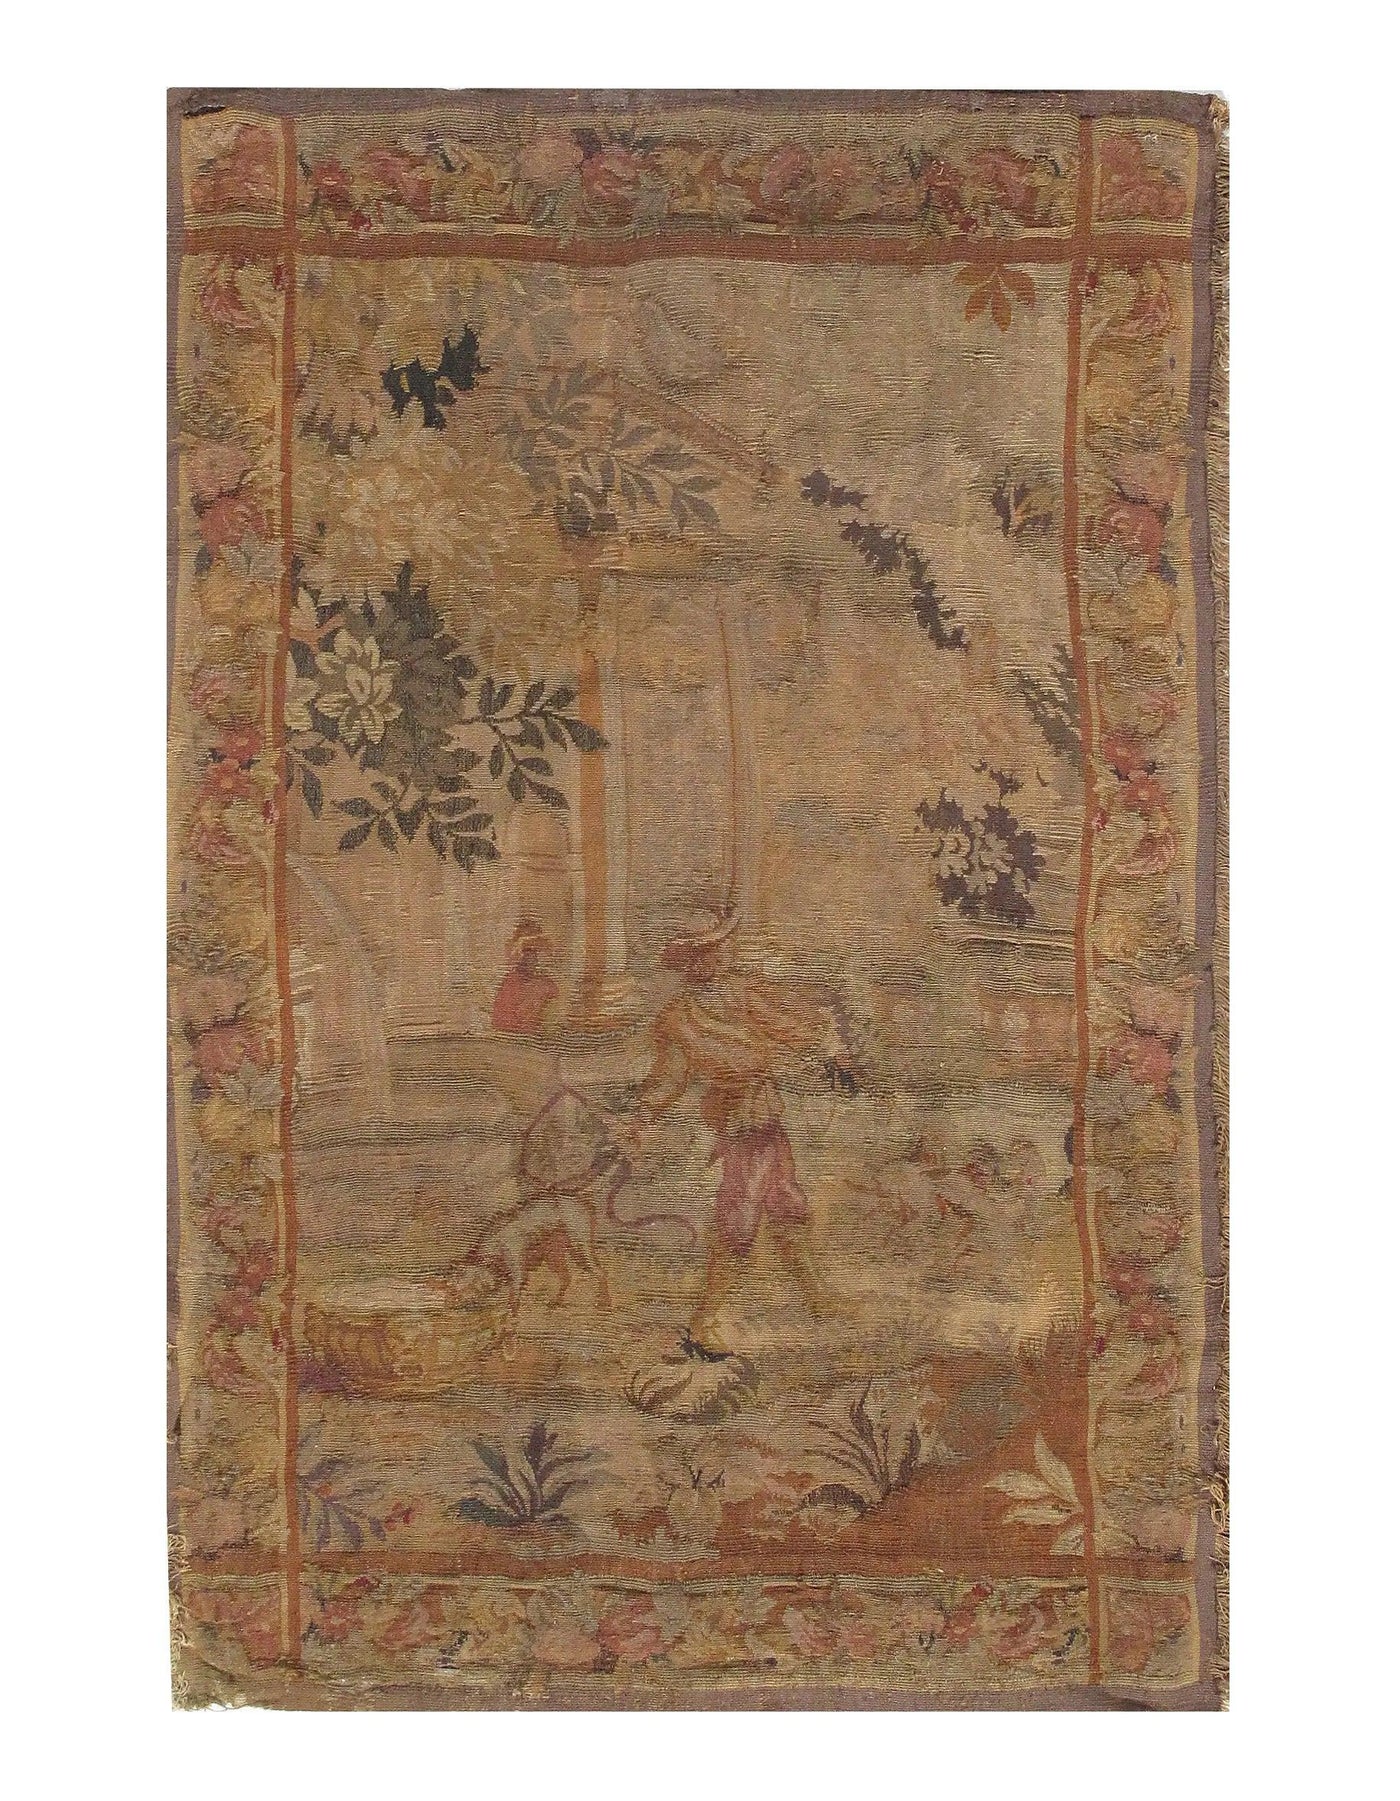 Light Brown France Tapestry - 4'3'' X 6'11''